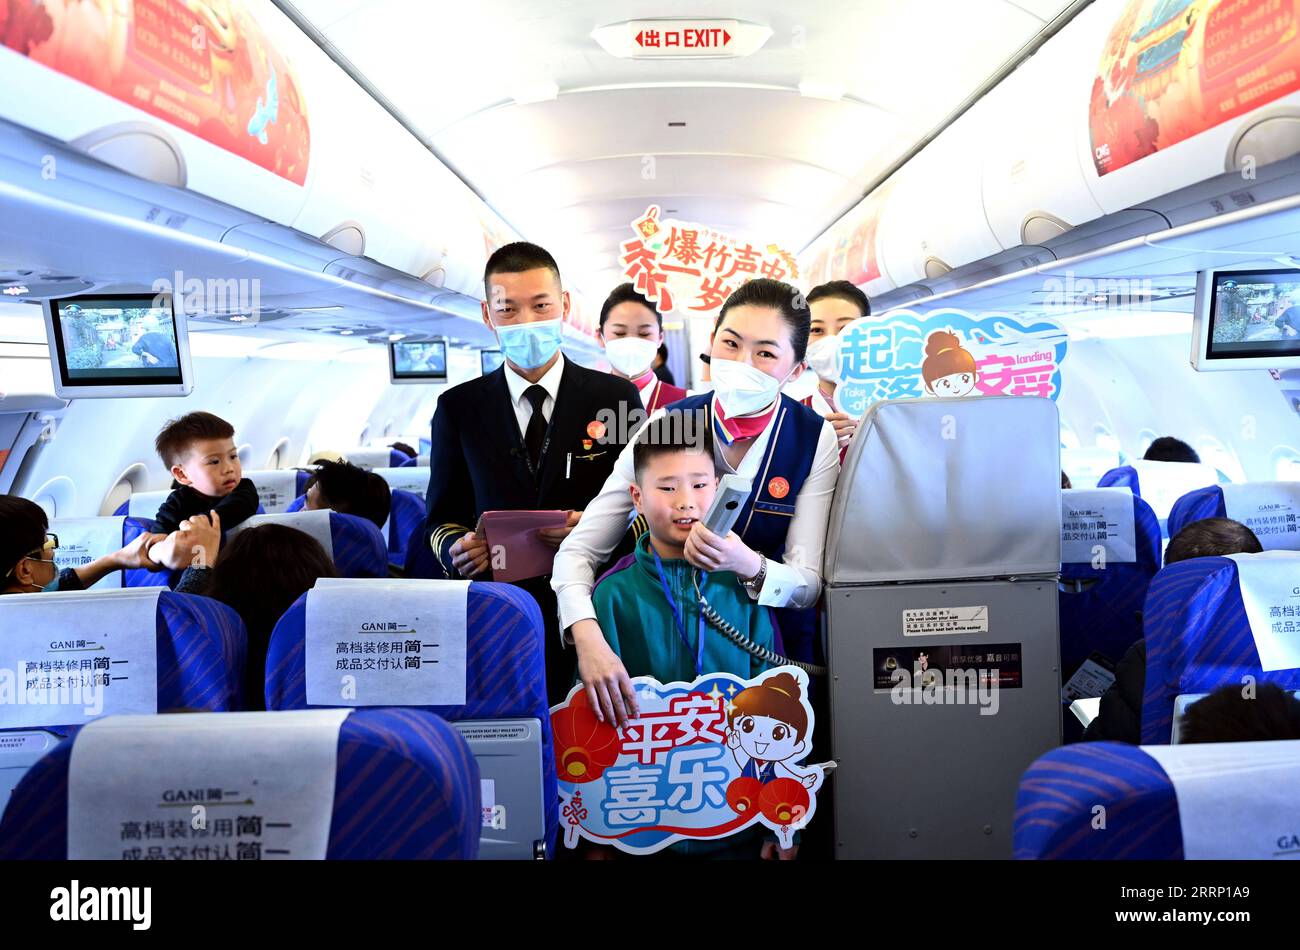 230210 -- DALIAN, Feb. 10, 2023 -- Ma Baoli plays a spring themed ancient poetry citing game with passengers during a flight from Dalian of northeast China s Liaoning Province to Guangzhou of south China s Guangdong Province, Feb. 4, 2023. Captain Ma Baoli, 35, has a great passion for Chinese classical poems. From 2018 onwards, Ma has been participating in the Chinese Classical Poetry Quiz Show every year, and won the championship this year. Ma s love for Chinese classical poems was nurtured by his father since childhood. As a graduate of Nanjing University of Aeronautics and Astronautics, Ma Stock Photo